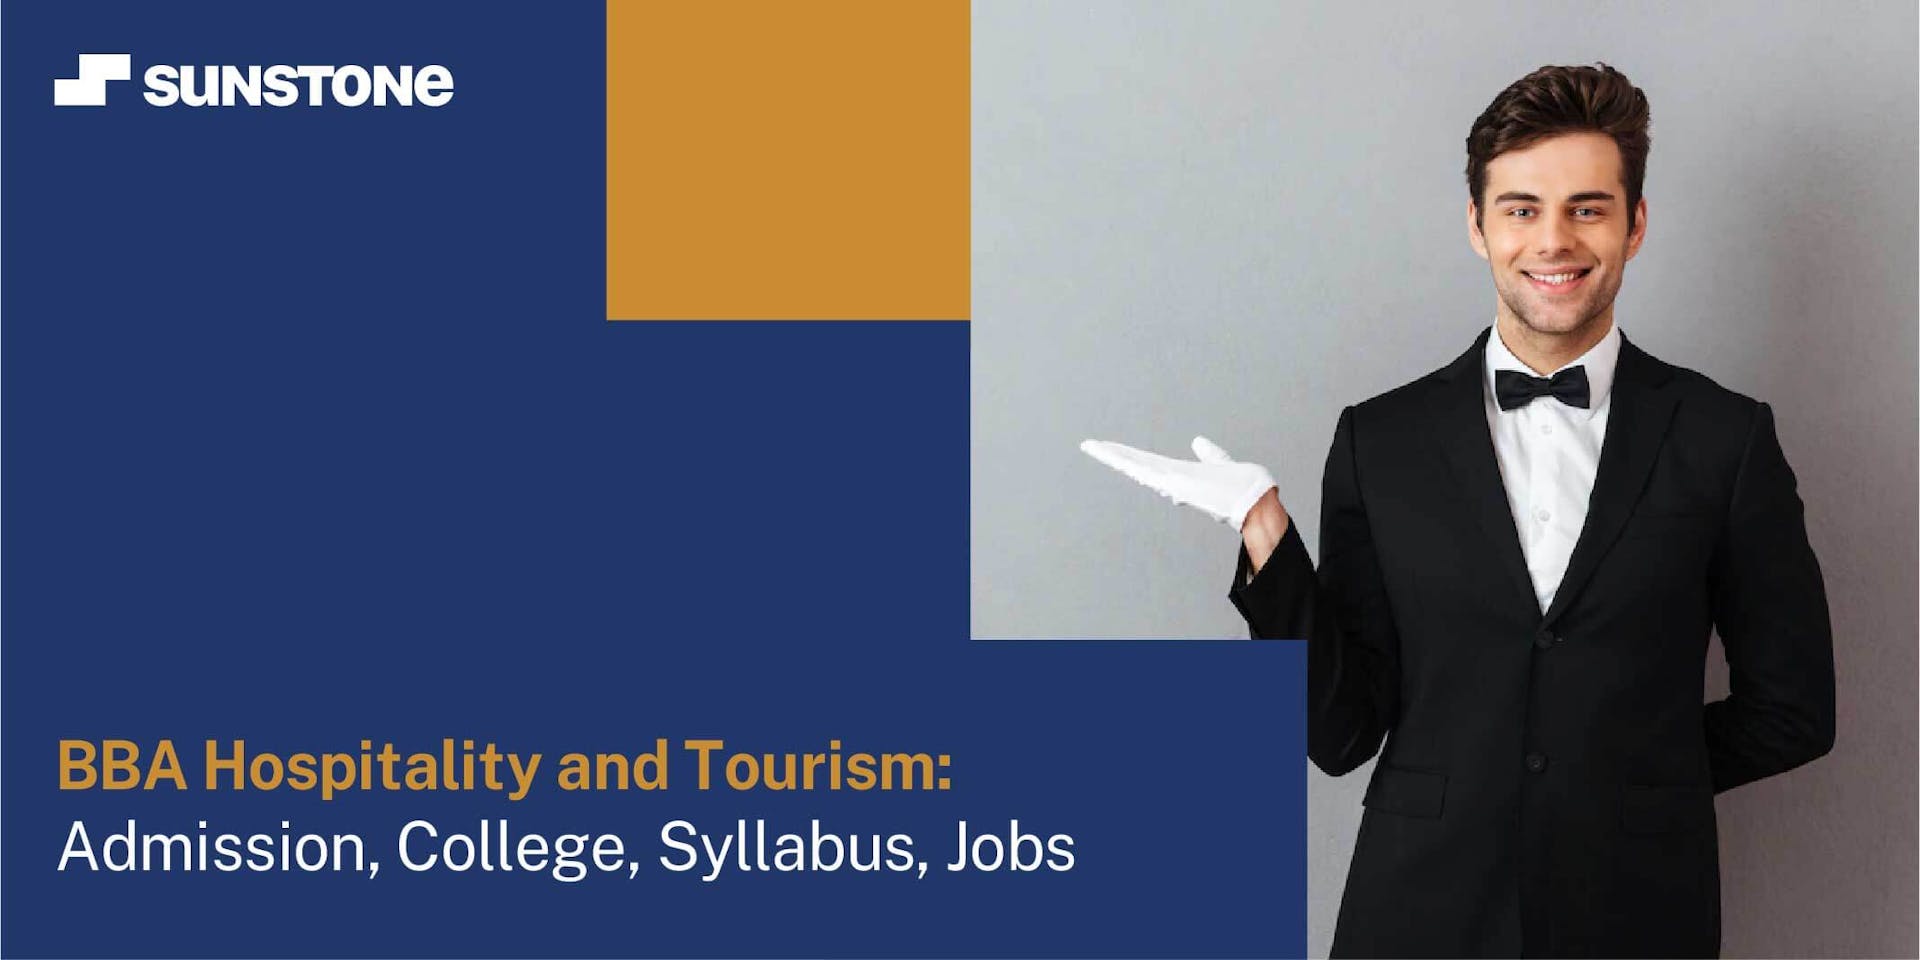 BBA Hospitality and Tourism: Admission, College, Syllabus, Job